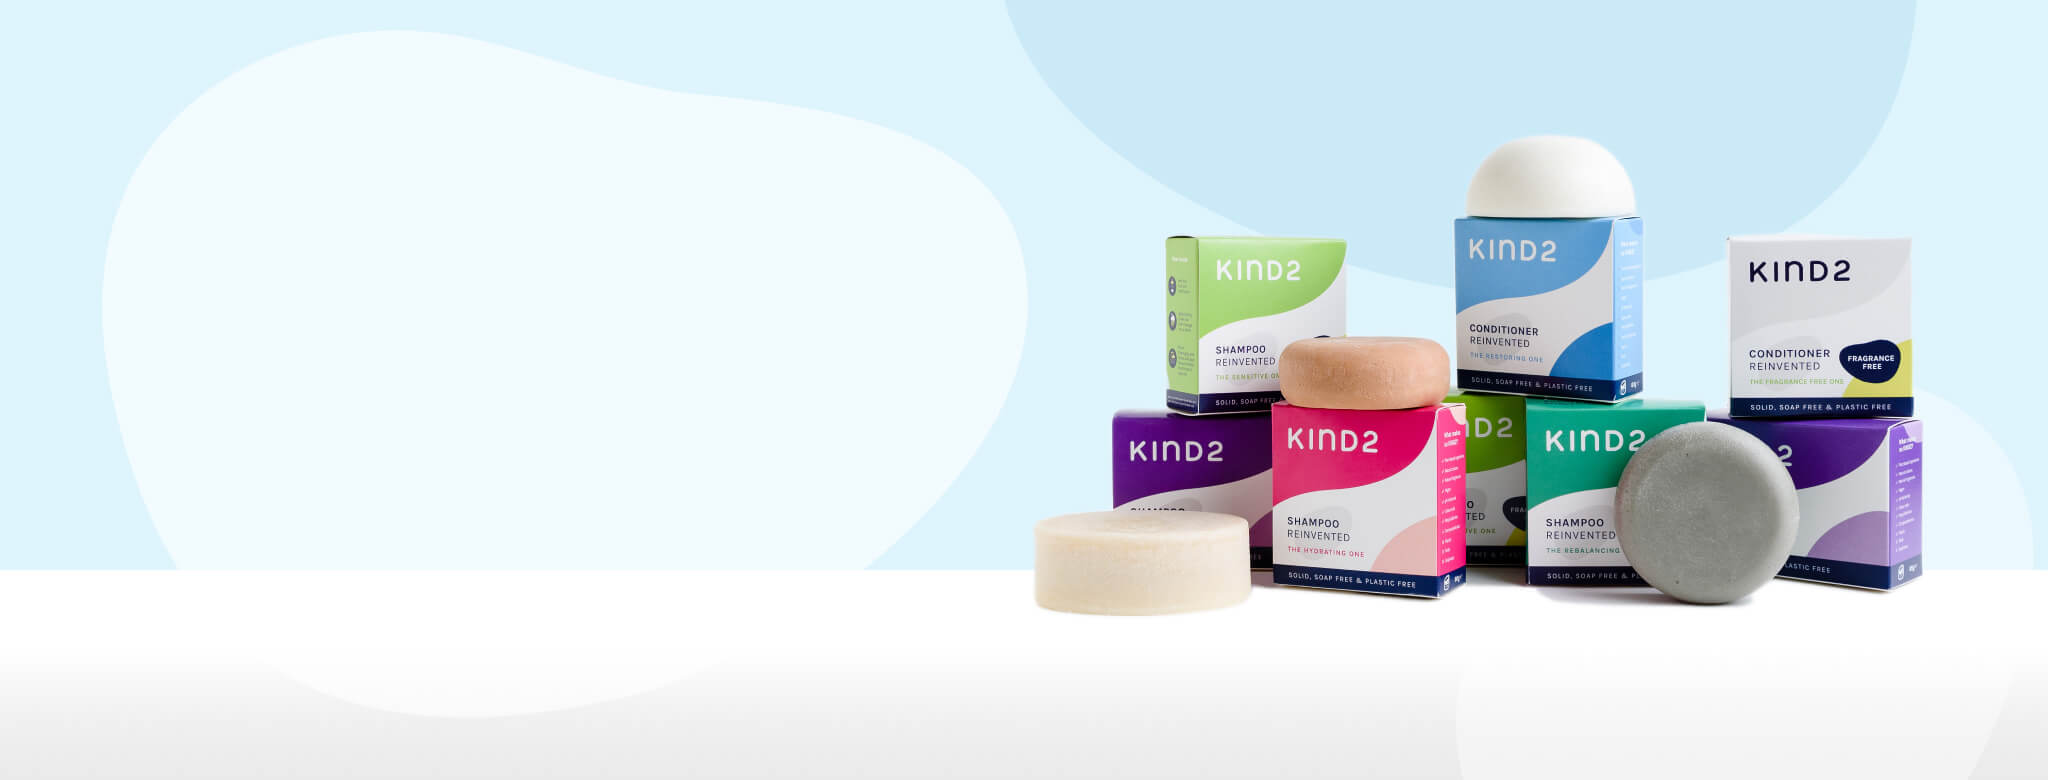 KIND2 Shampoo and Conditioner Bars on blue background